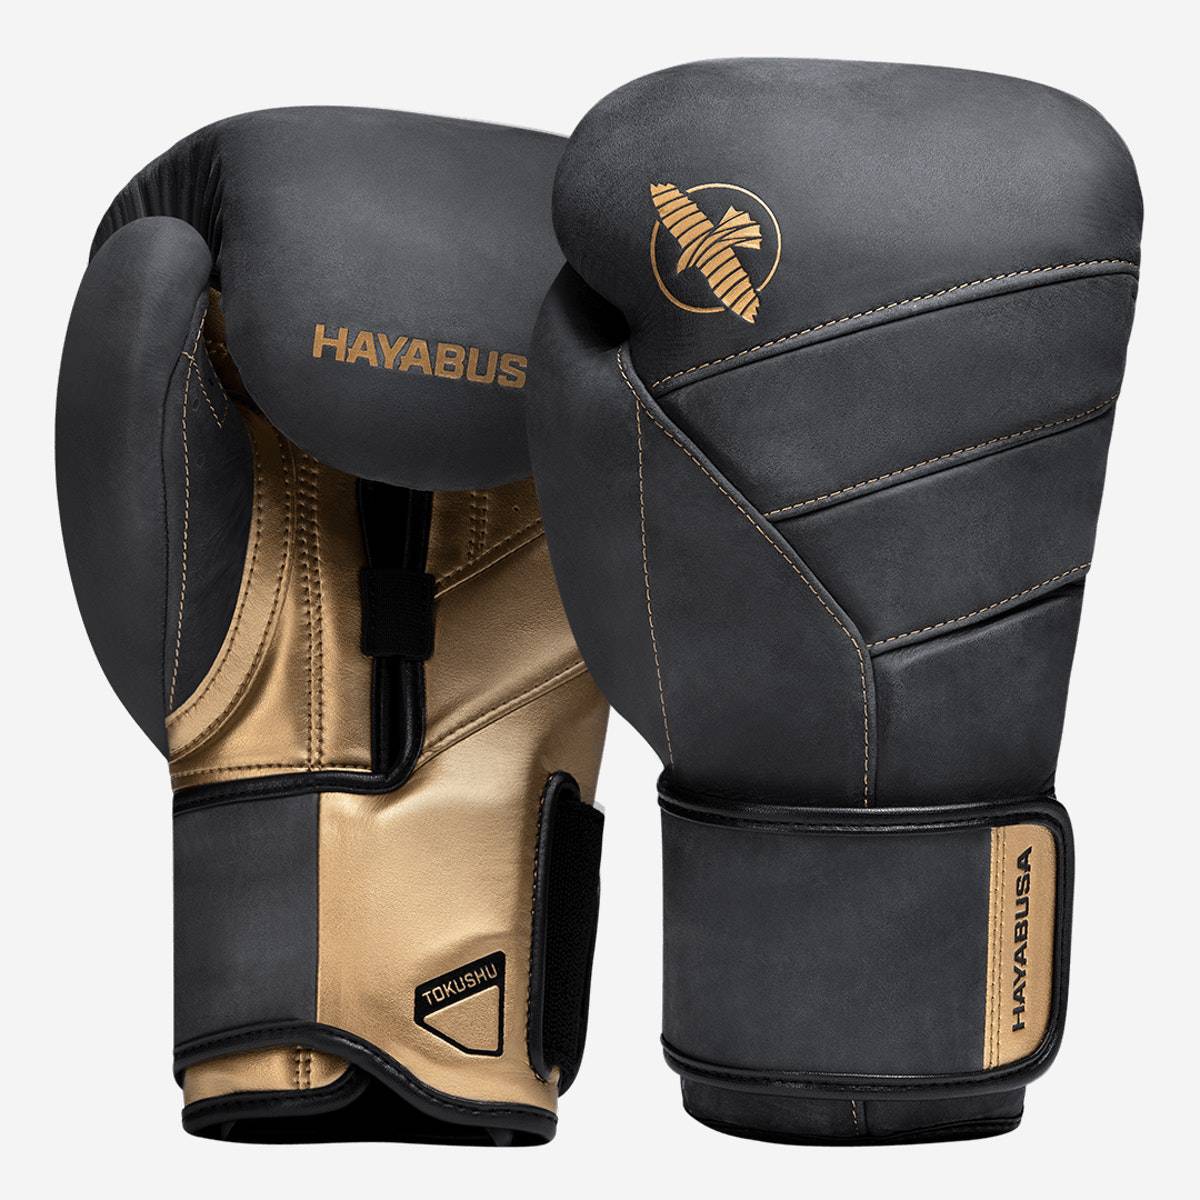 Hayabusa | Boxing Gloves - T3 LX Boxing Gloves - XTC Fitness - Exercise Equipment Superstore - Canada - Boxing Gloves